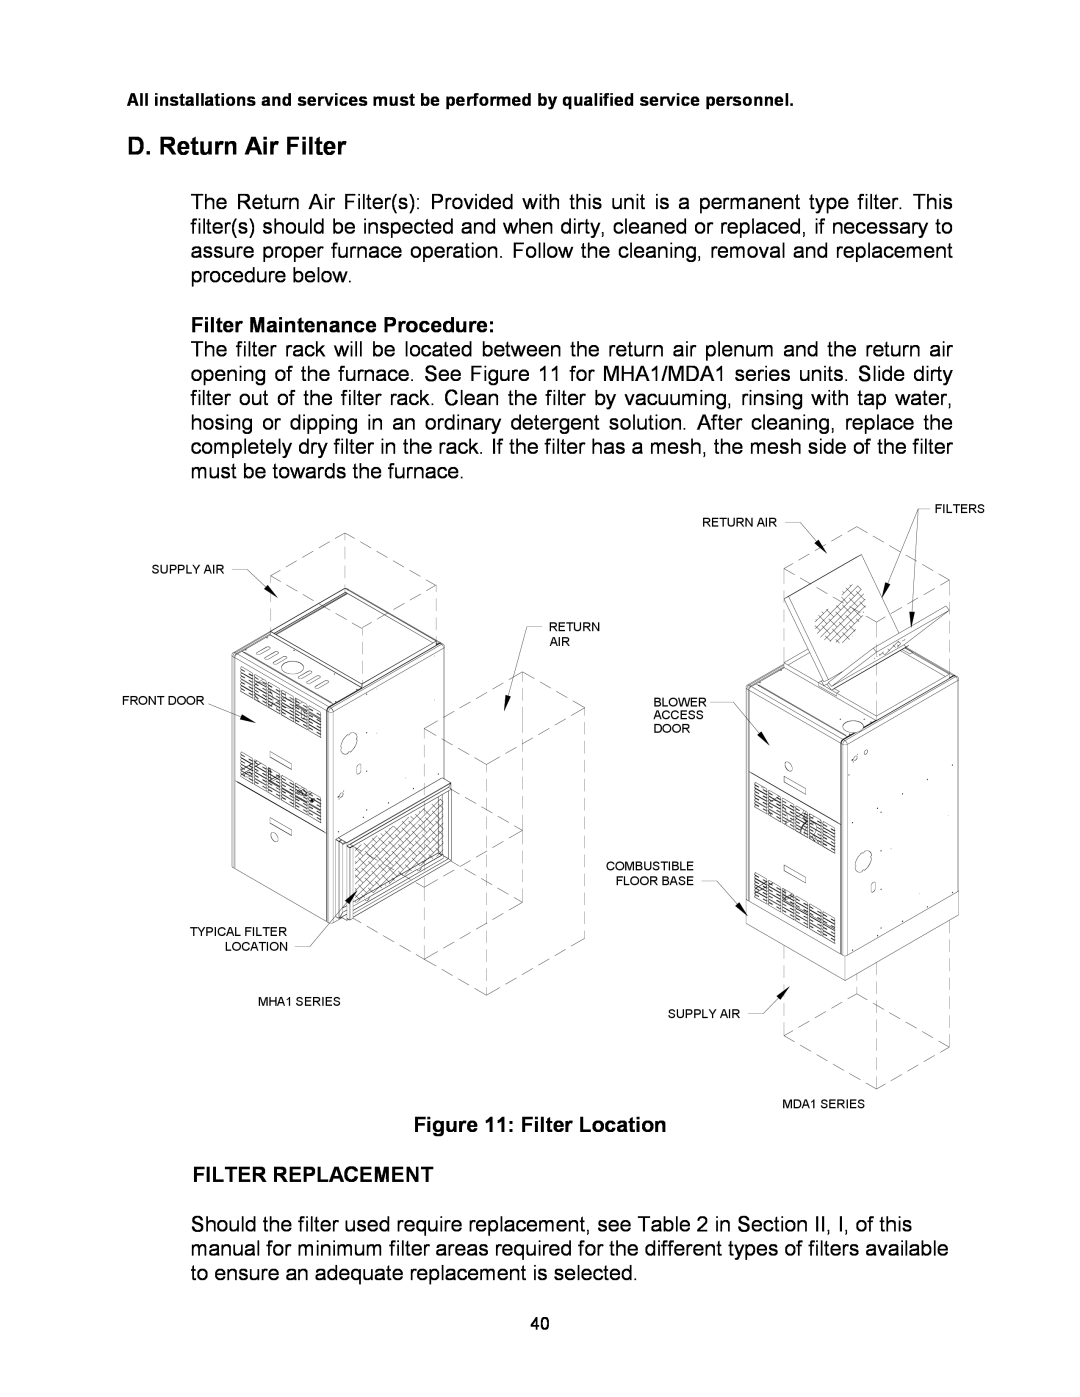 Thermo Products MHA1-50N, MDA1-50N D. Return Air Filter, Filter Maintenance Procedure, Filter Location FILTER REPLACEMENT 